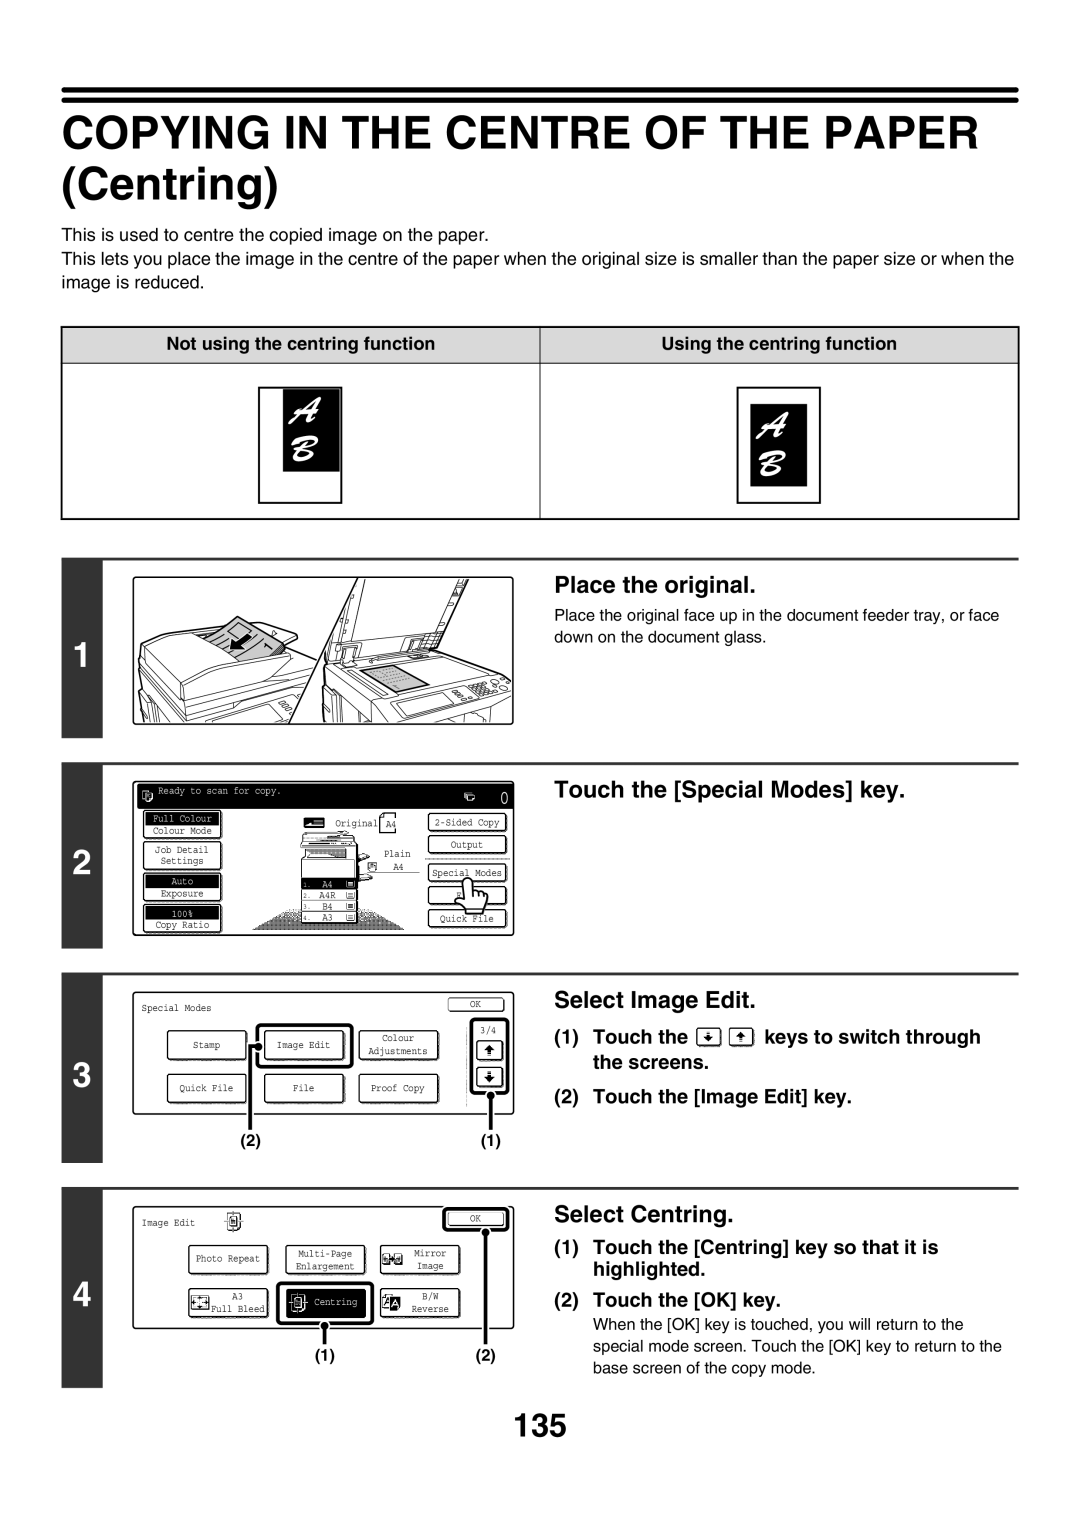 Sharp MX-4501N COPYING IN THE CENTRE OF THE PAPER Centring, Select Centring, Touch the Centring key so that it is, 1. A4 